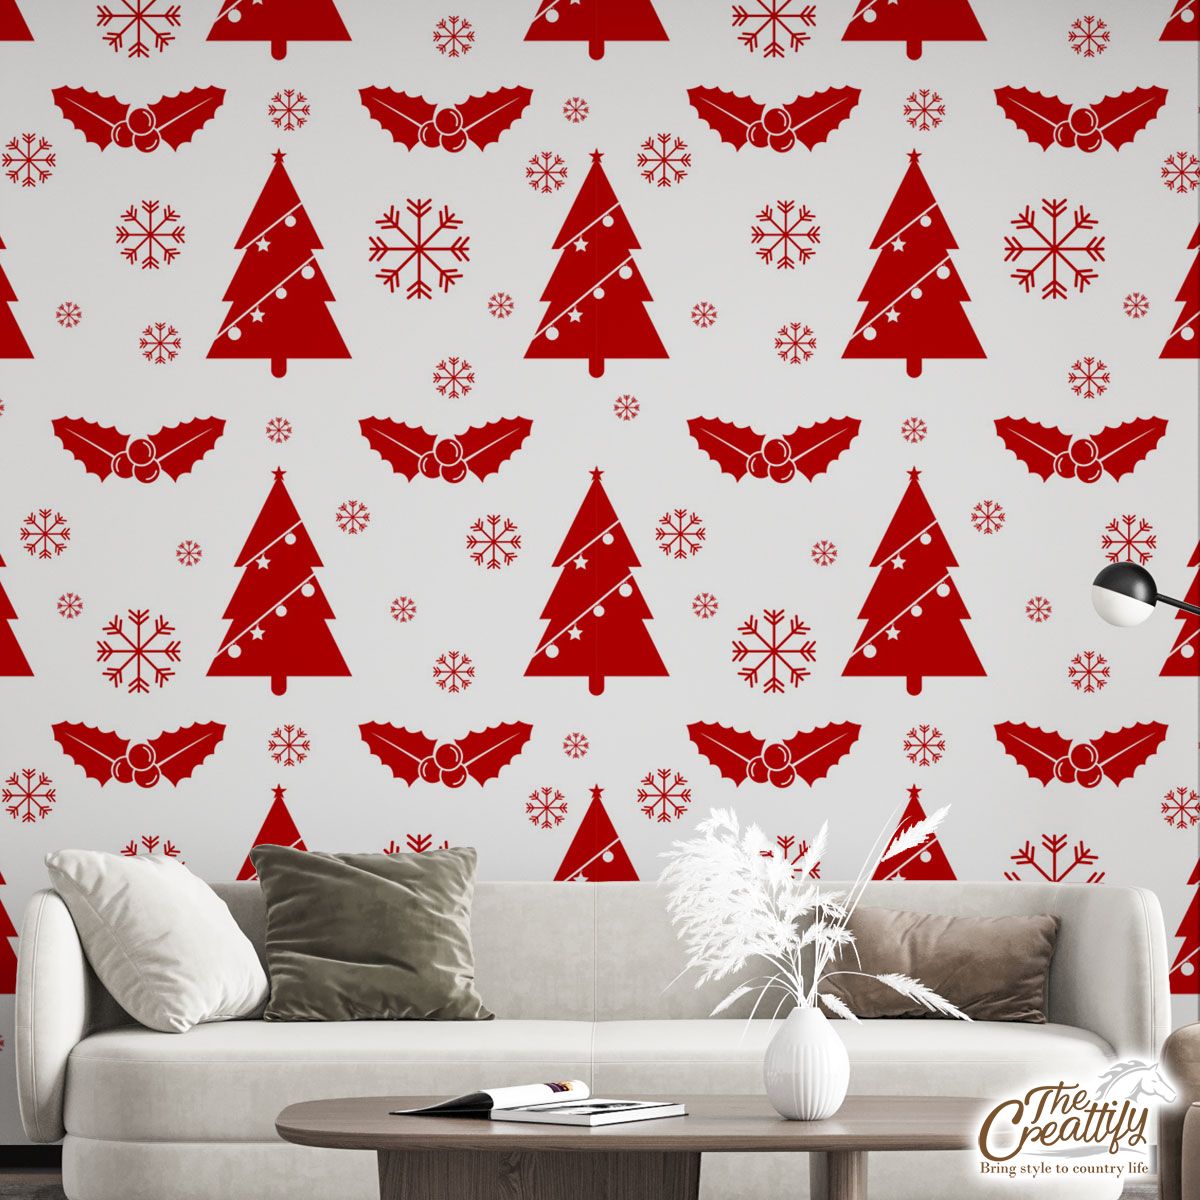 Pine Tree With Christmas Light And Holly Left On The Snowflake Background Wall Mural